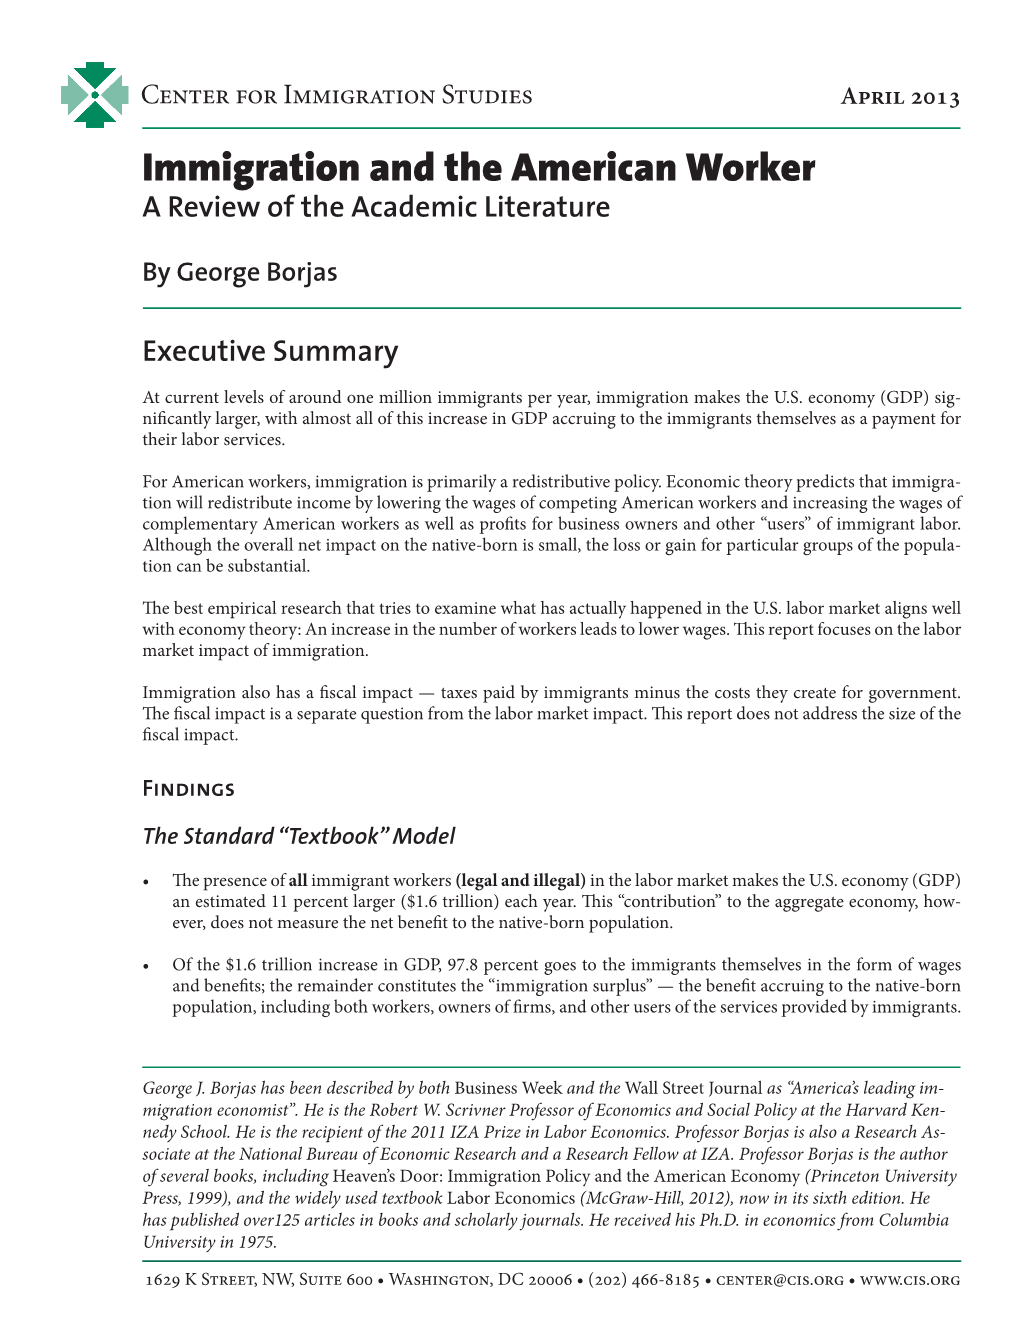 Immigration and the American Worker a Review of the Academic Literature